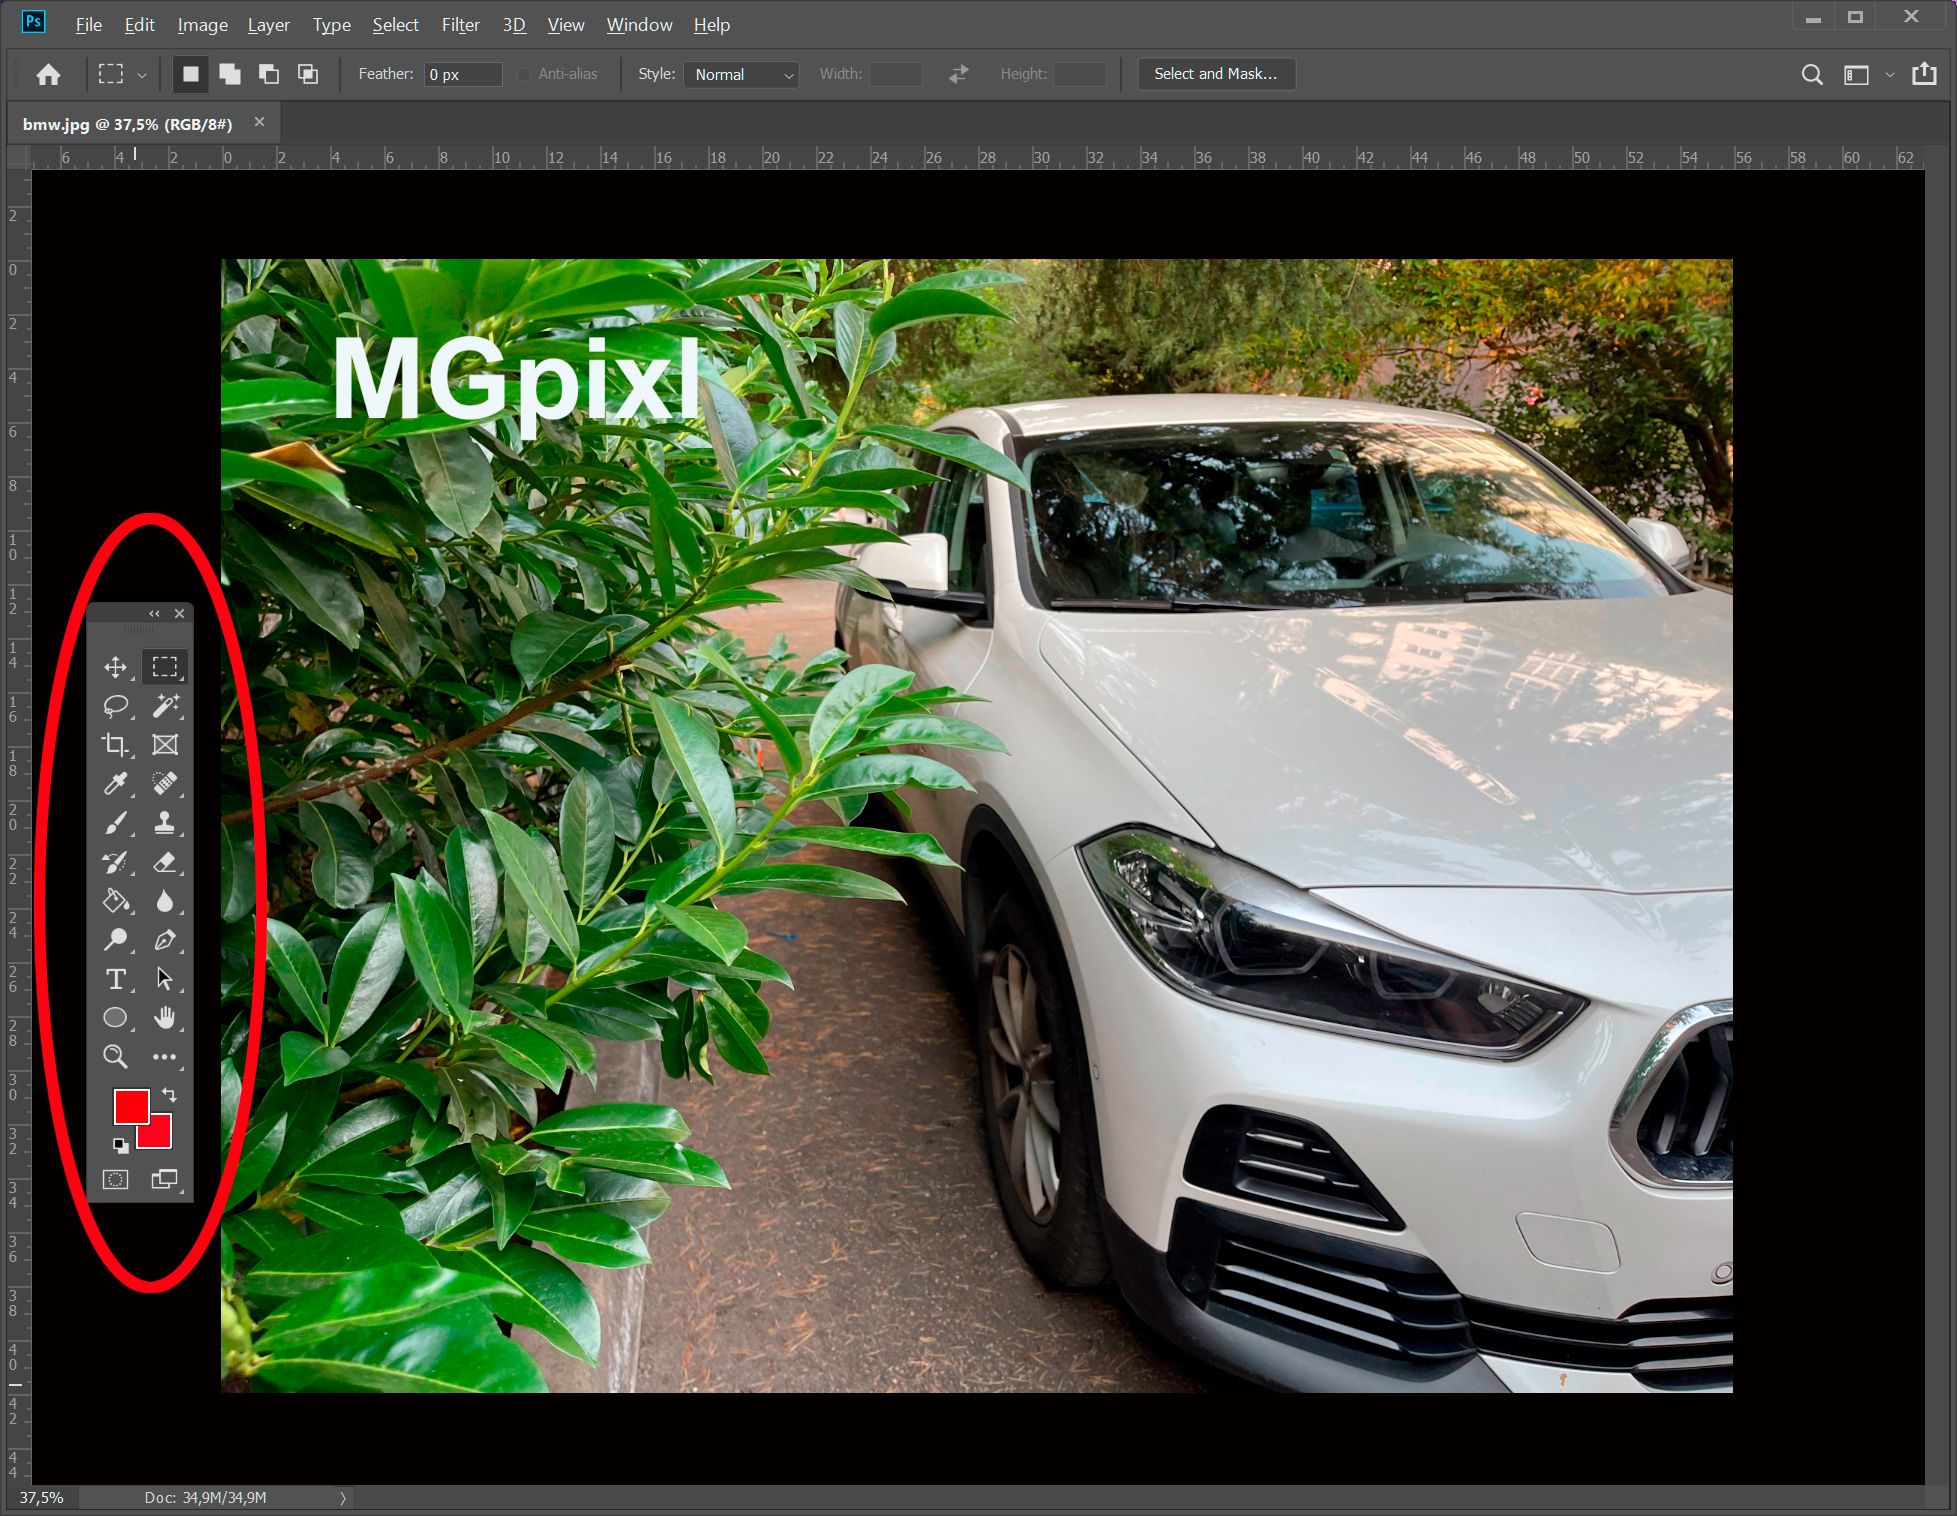 Removing the Megapixl watermark from your photos using Photoshop..